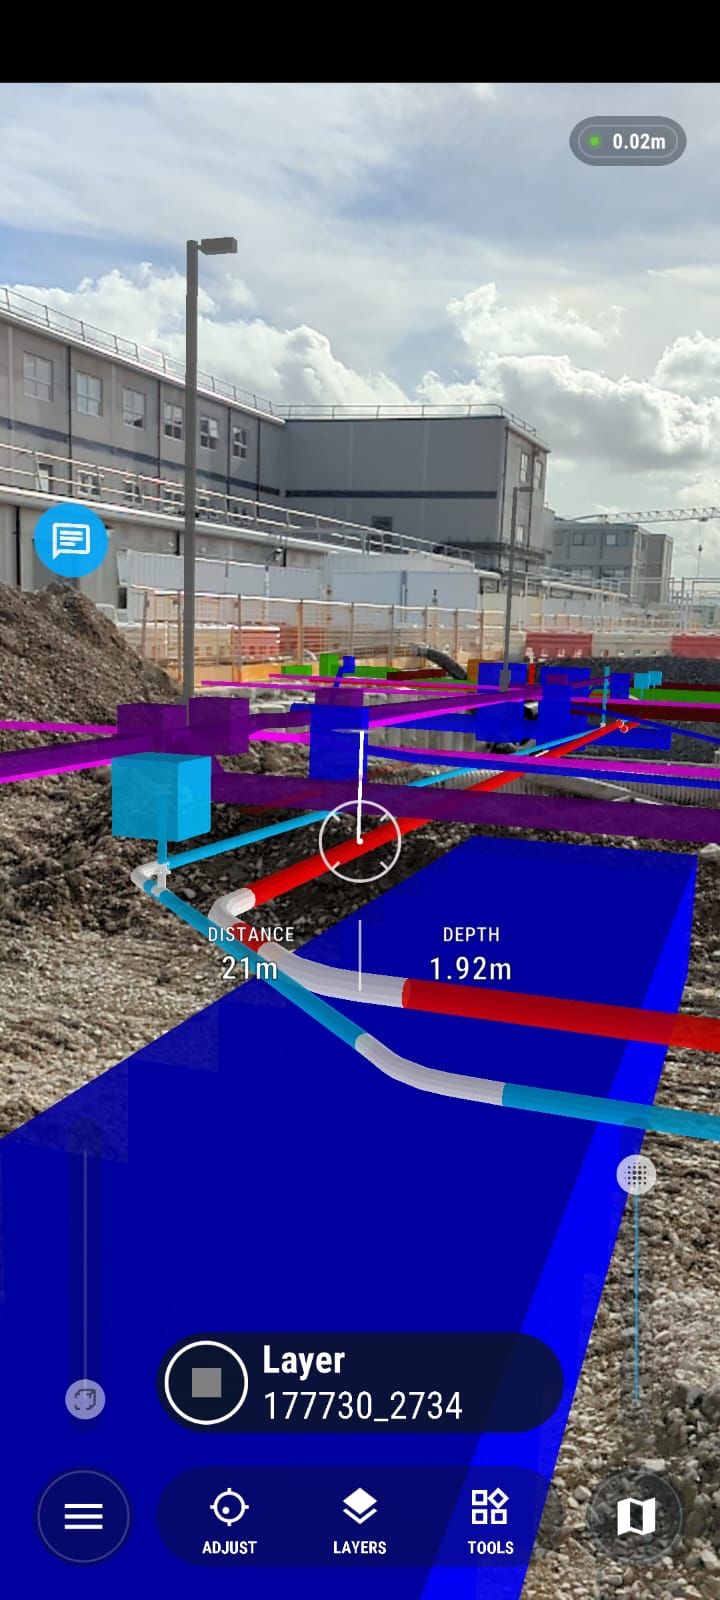 Gain the ability to see crucial project data in easy to understand AR visuals.